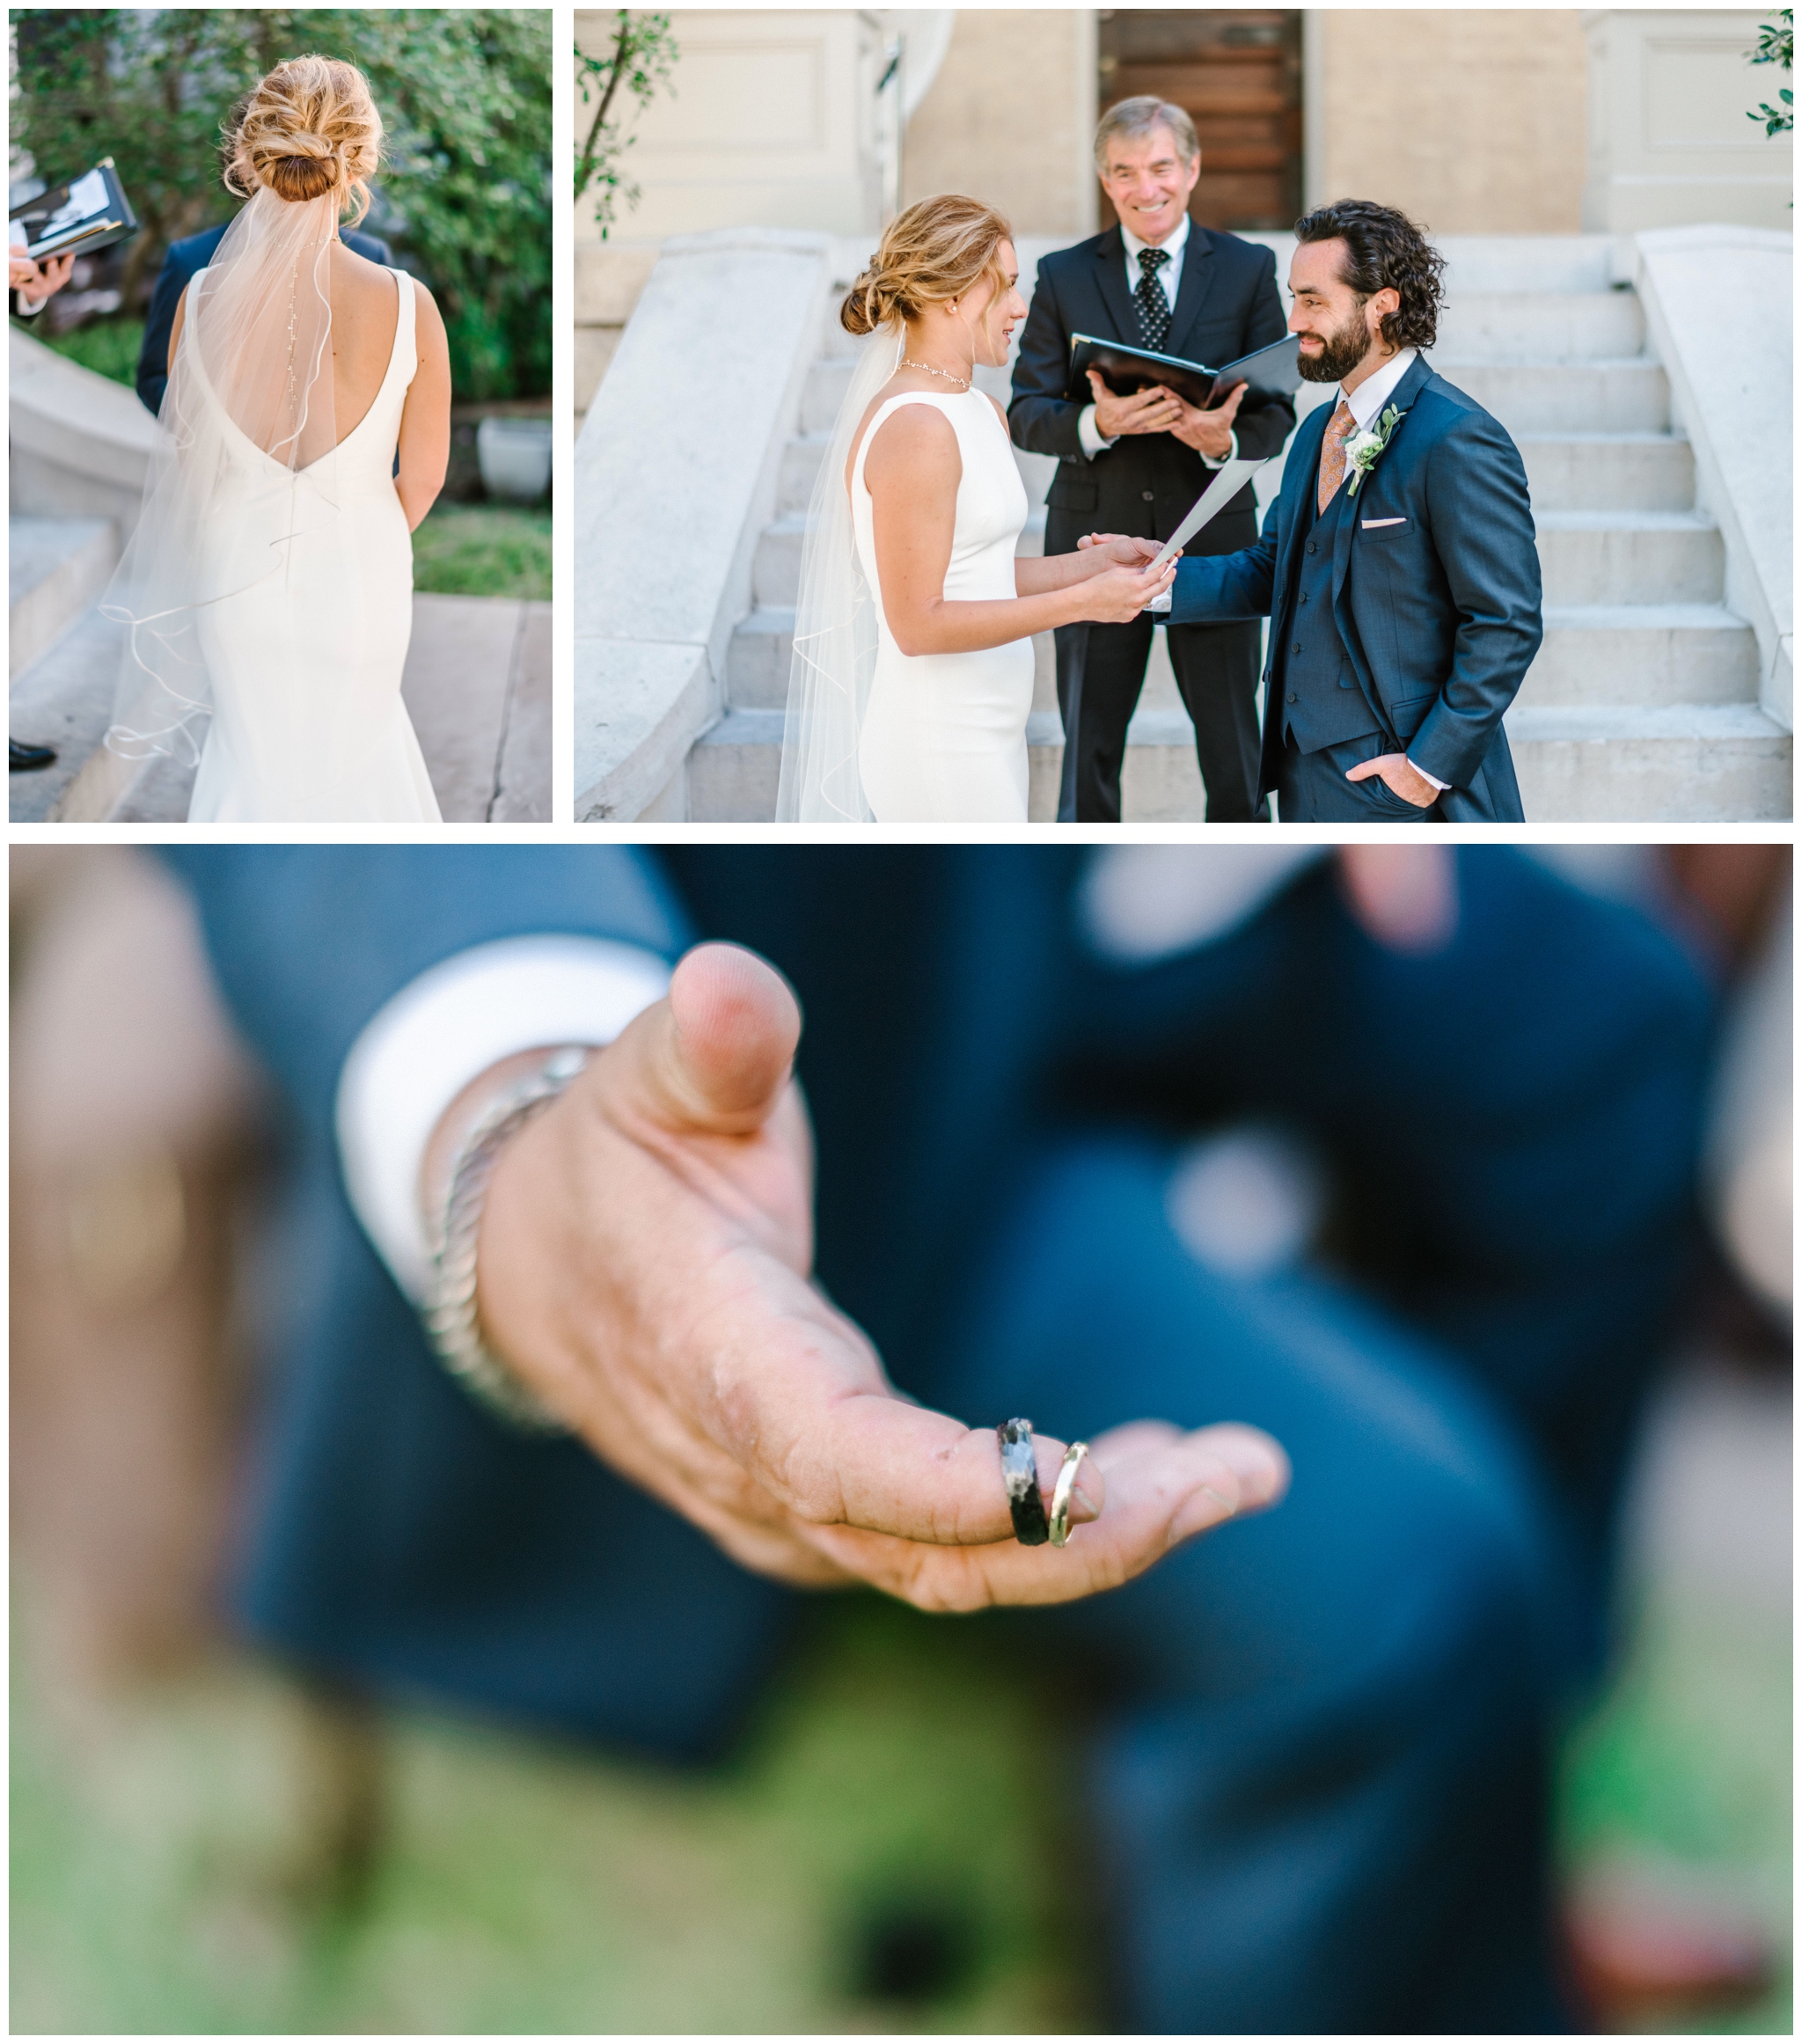 Emily and Ralph’s intimate wedding ceremony in Austin, Texas